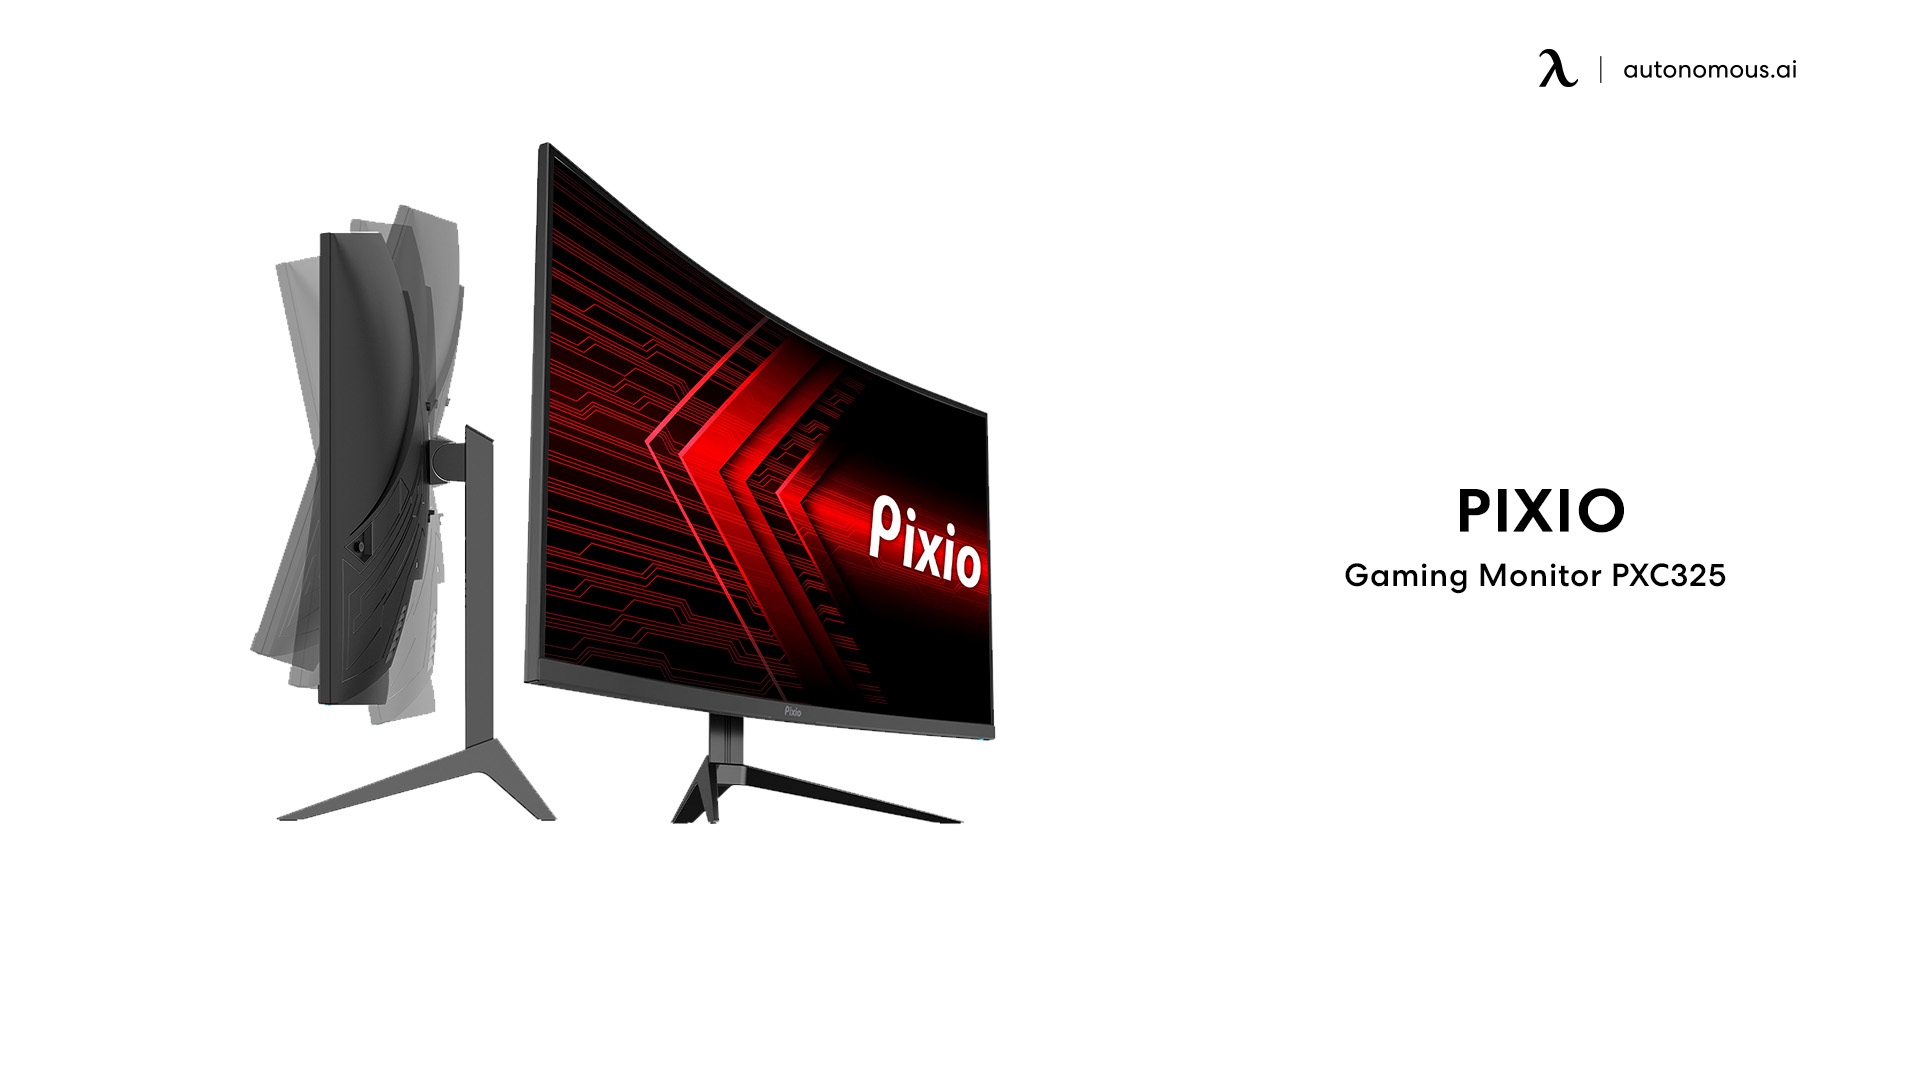 curved gaming monitor PXC325 by Pixio